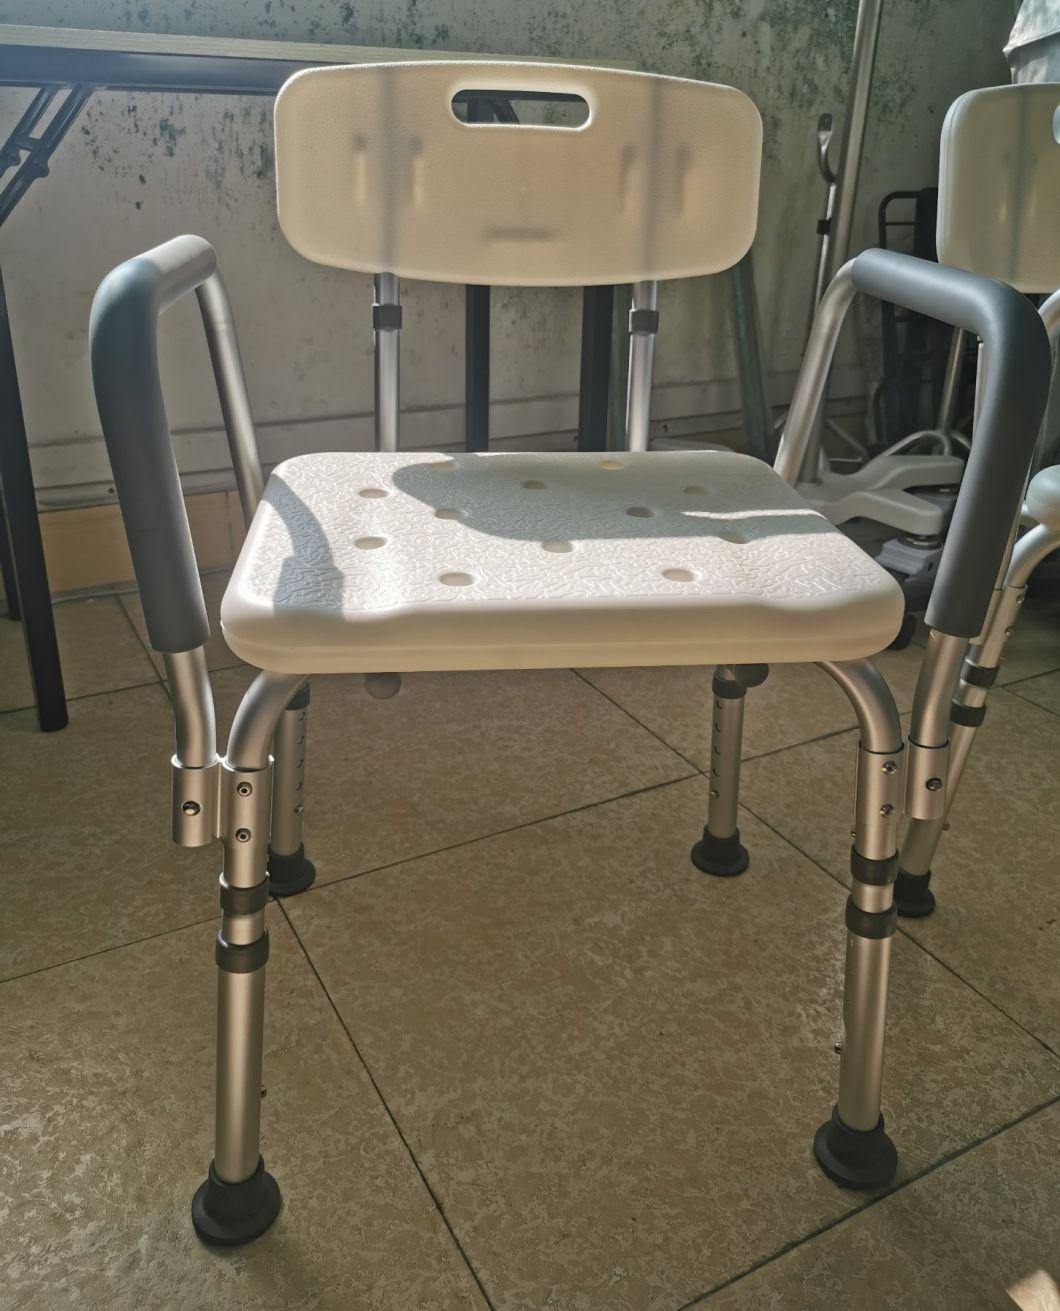 Commode Chair Kd Style Shower Chair Armrest Shower Chair W/Back